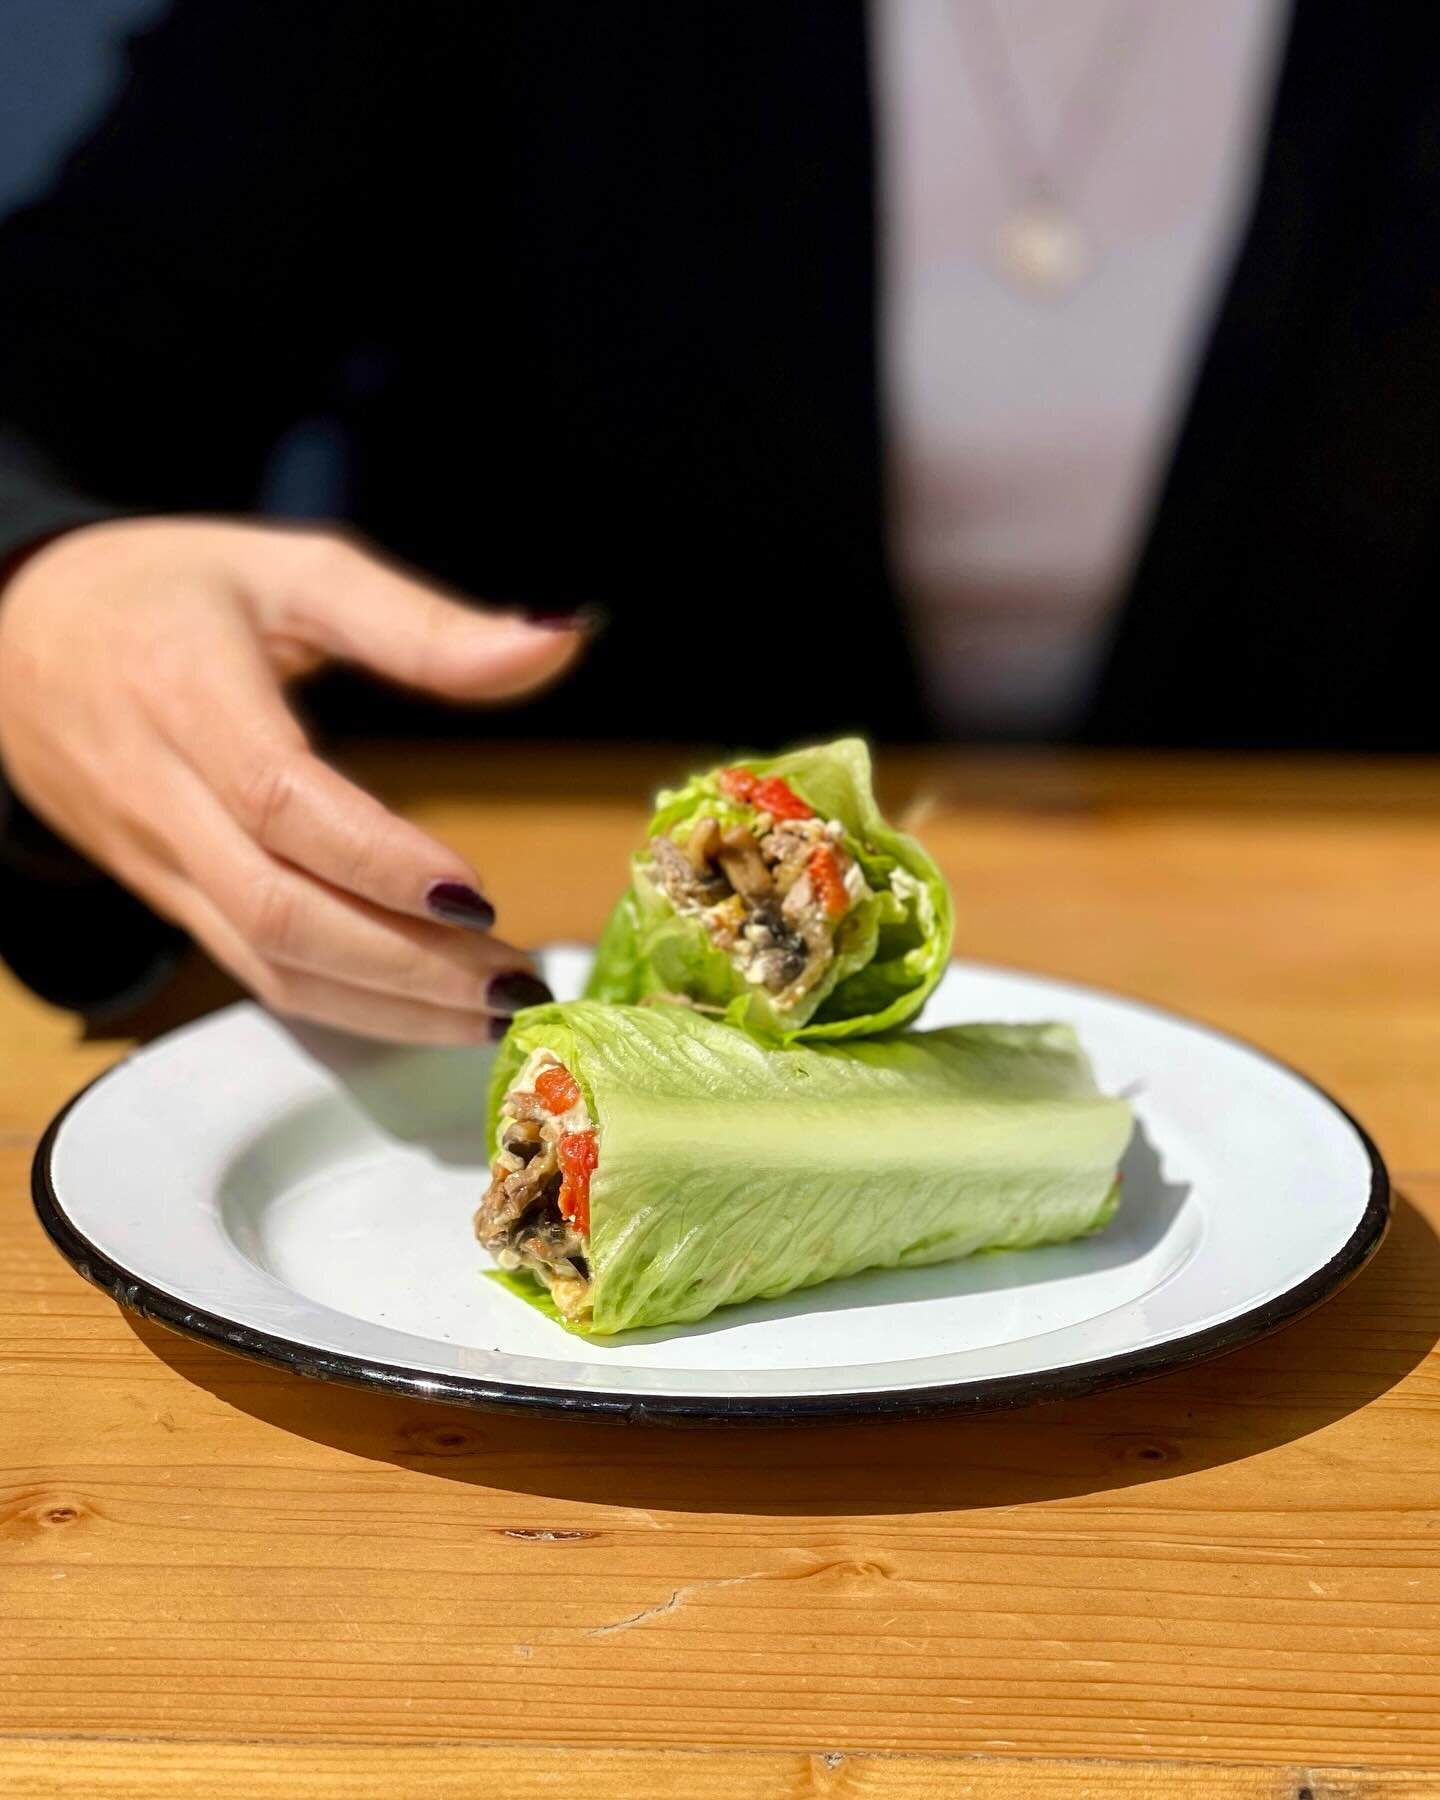 Our beef wrap is back! Grab your protein fix from @meatthefish or @toters_delivery 🥩 🥬 

#zulu#zulubeirut